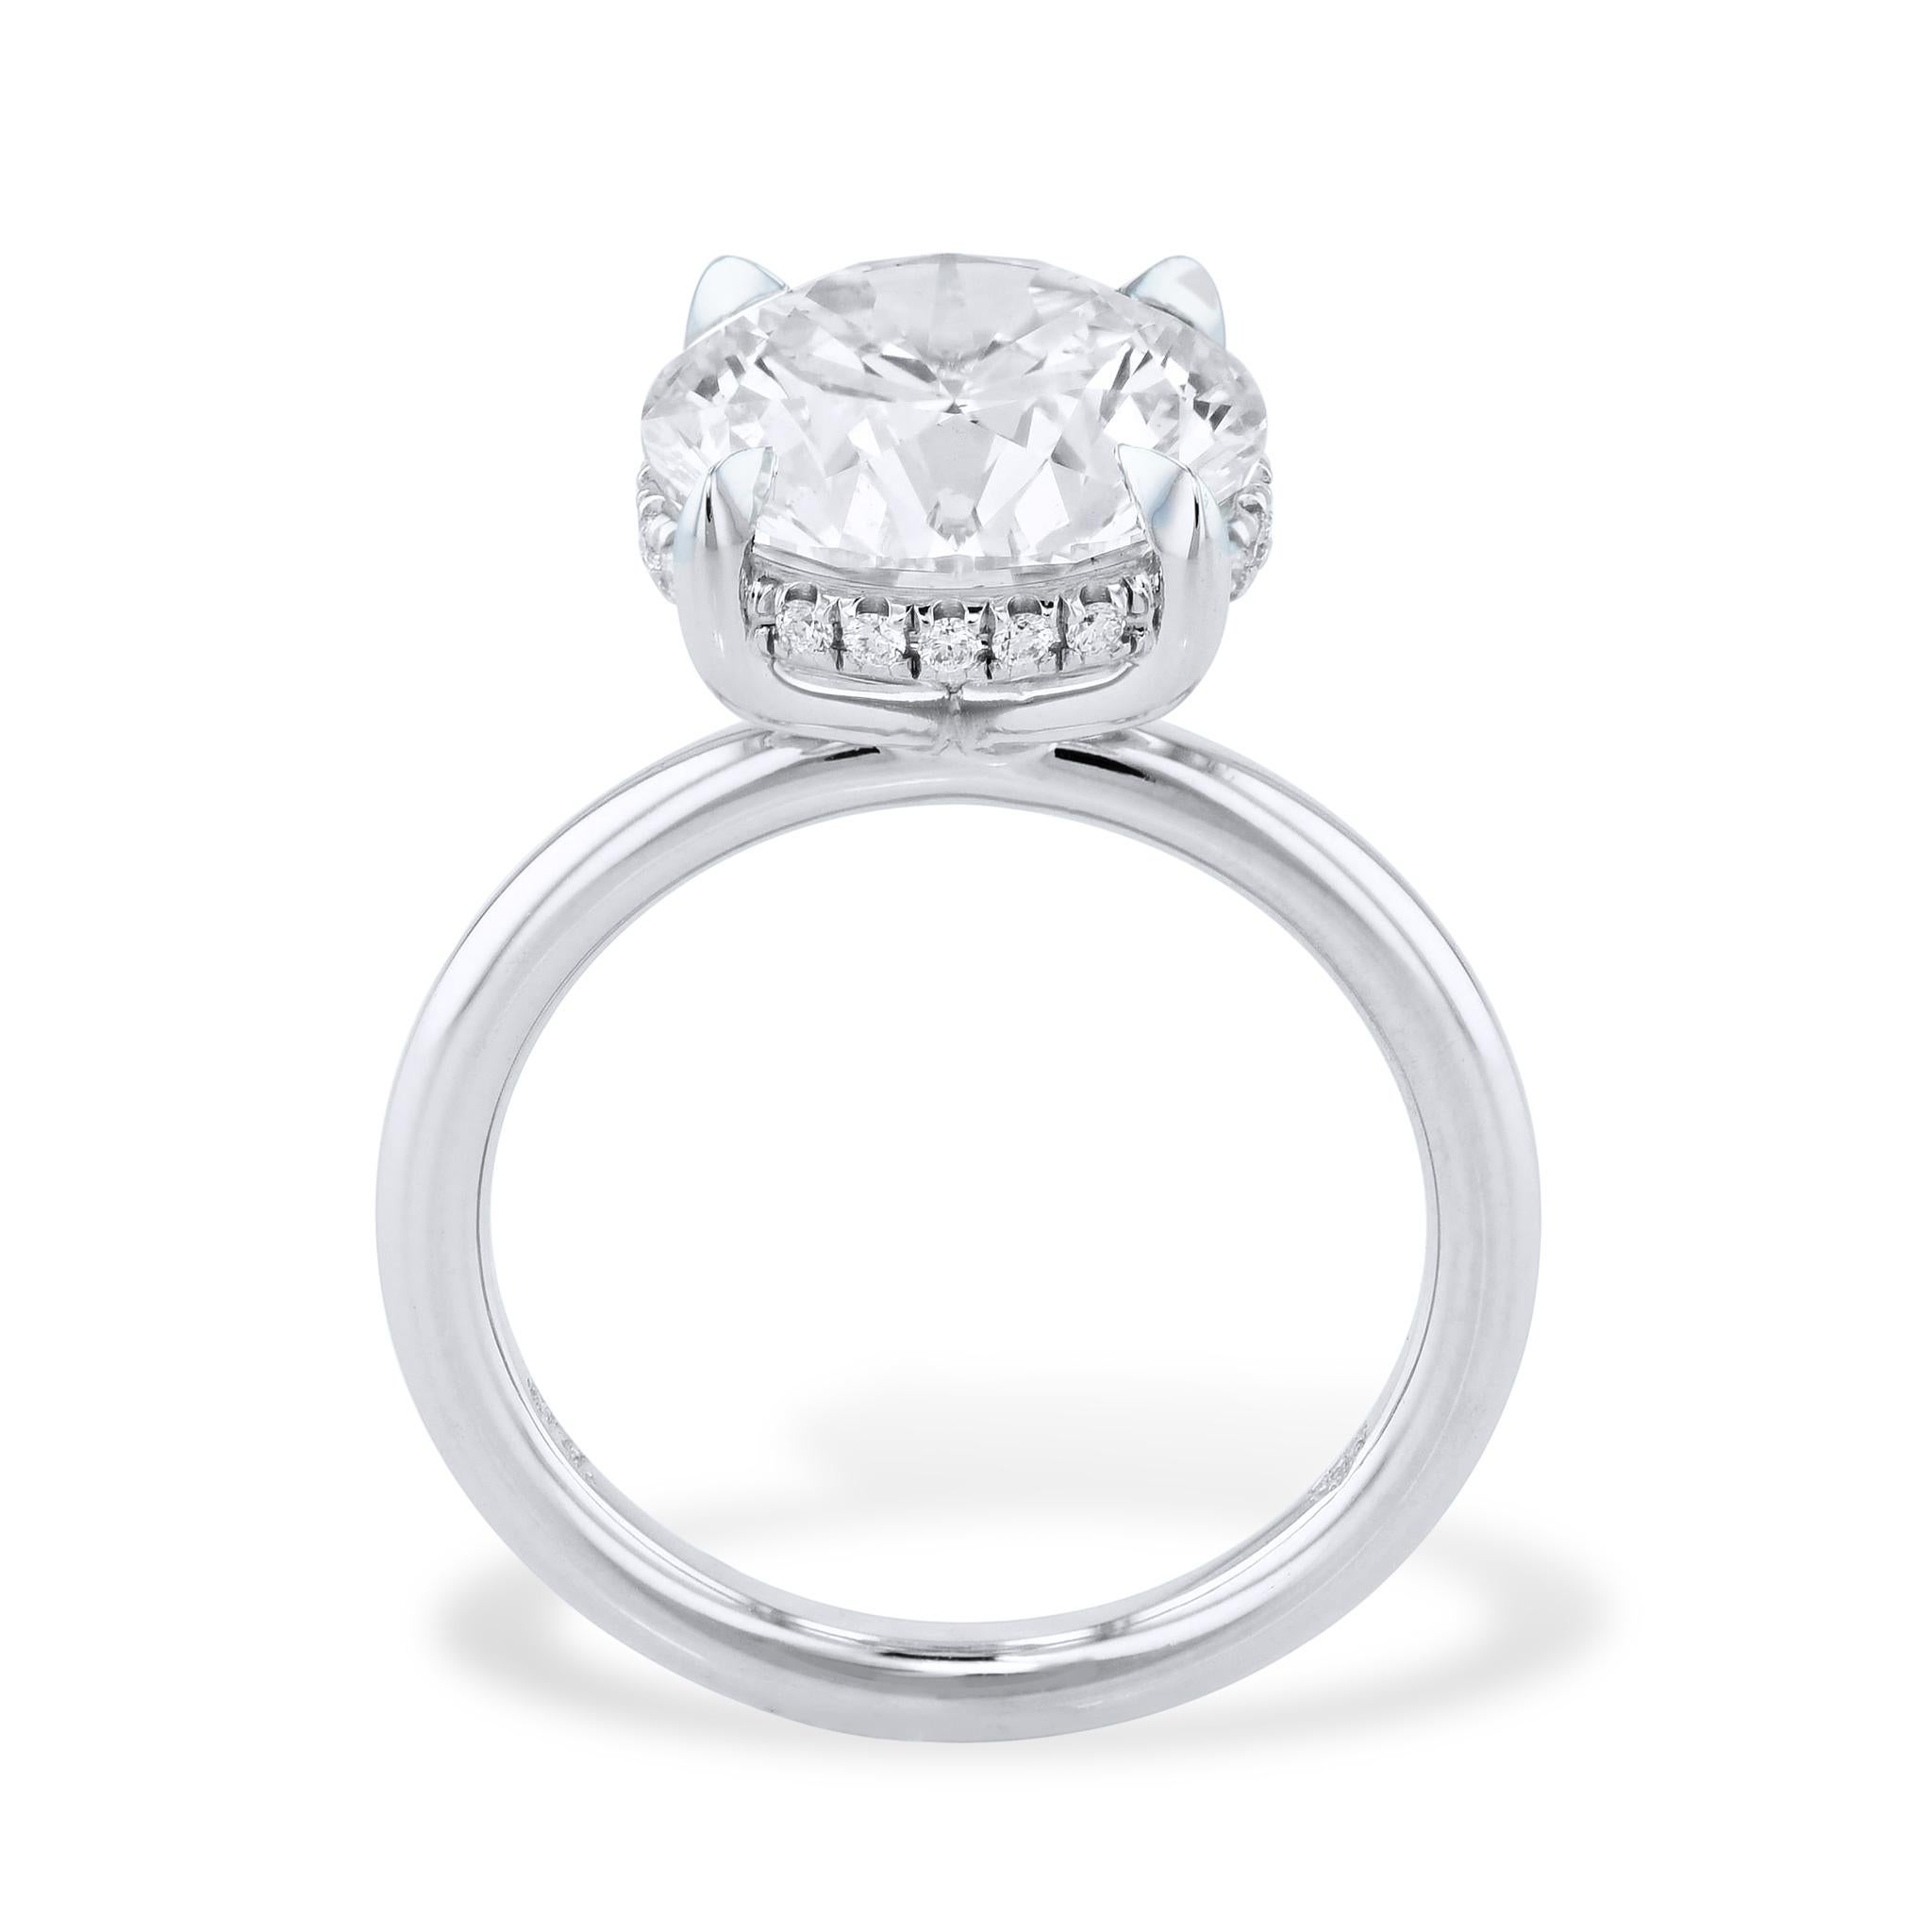 This captivating round diamond platinum engagement ring features an exquisite 5.07 carat center diamond and is enhanced with diamond pave that gleams underneath the basket for a truly remarkable look. 

The center stone is GIA certified. The number